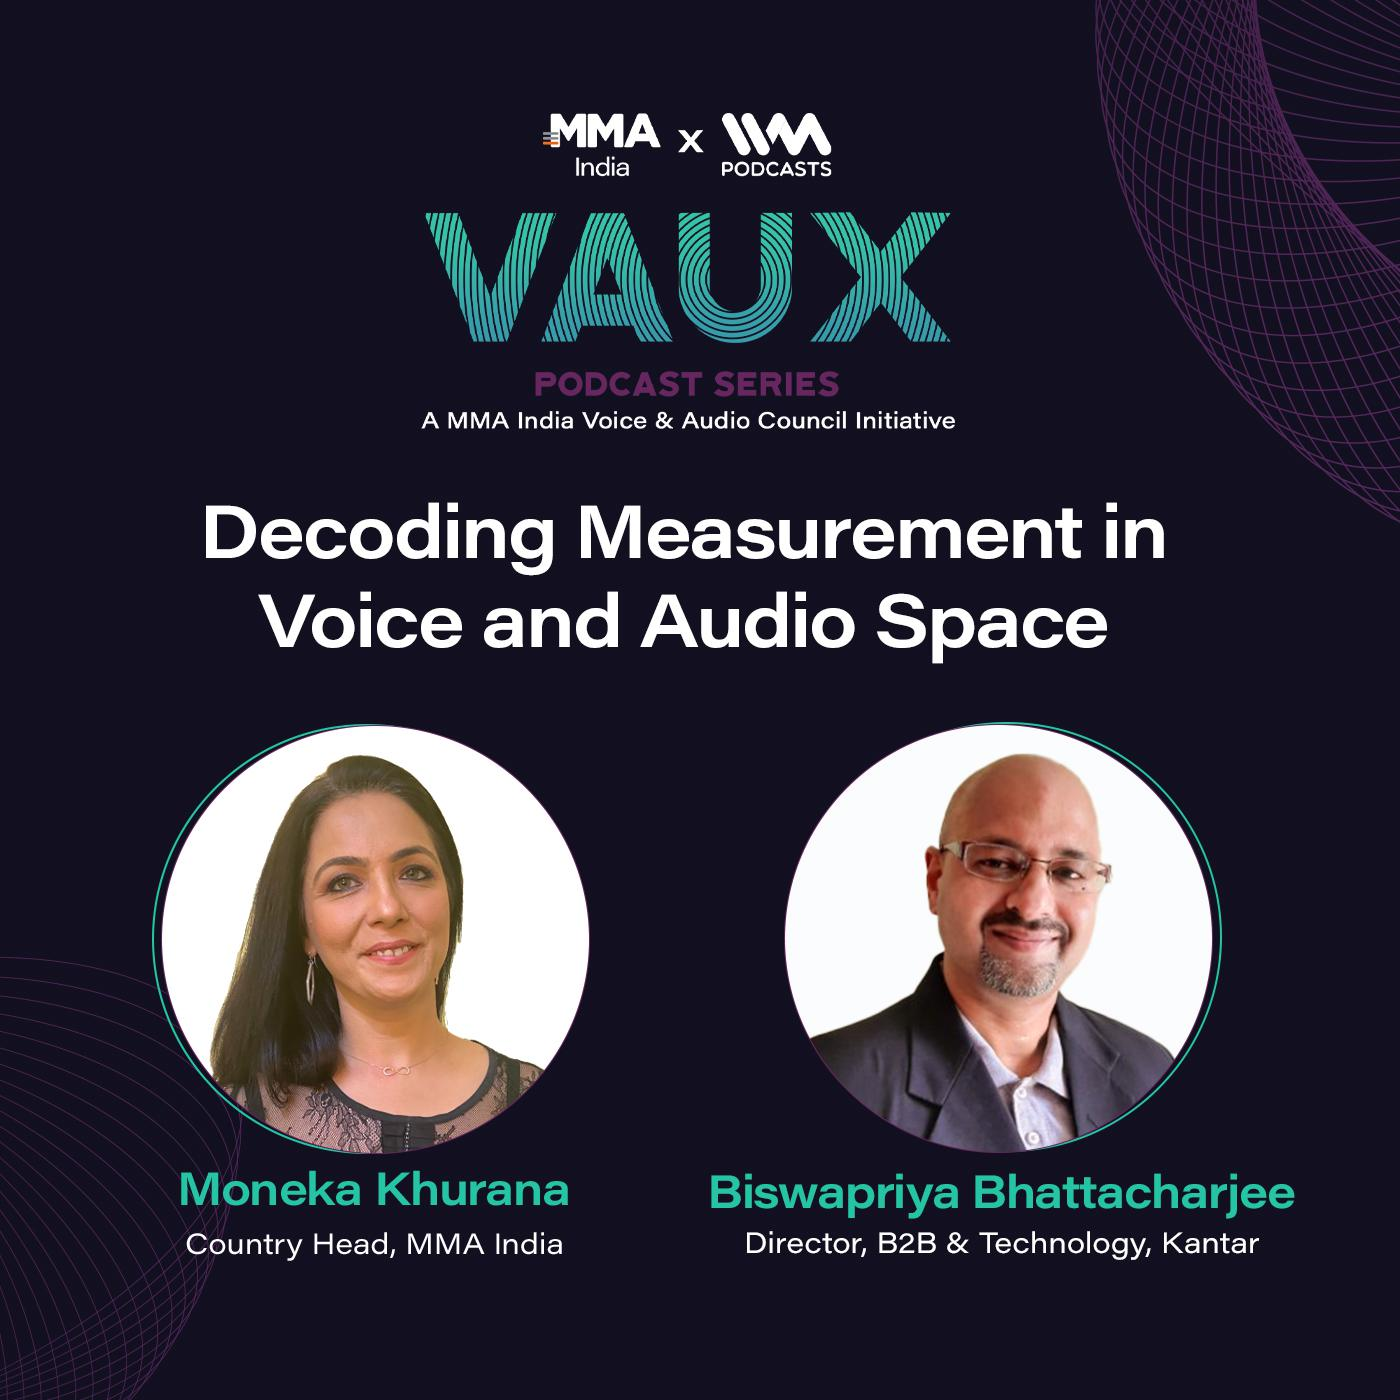 Decoding Measurement in Voice and Audio Space